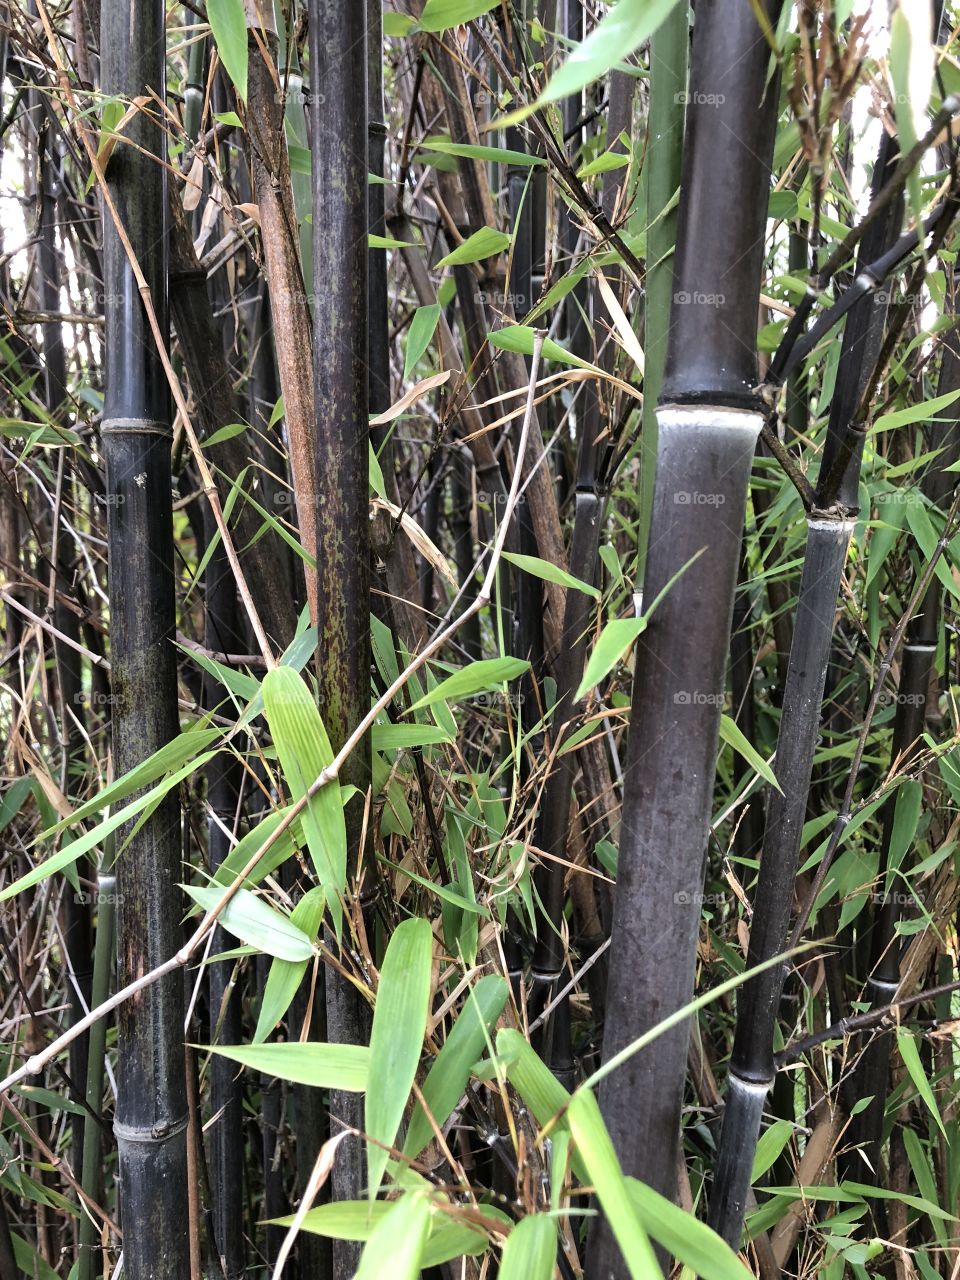 A bamboo forest 